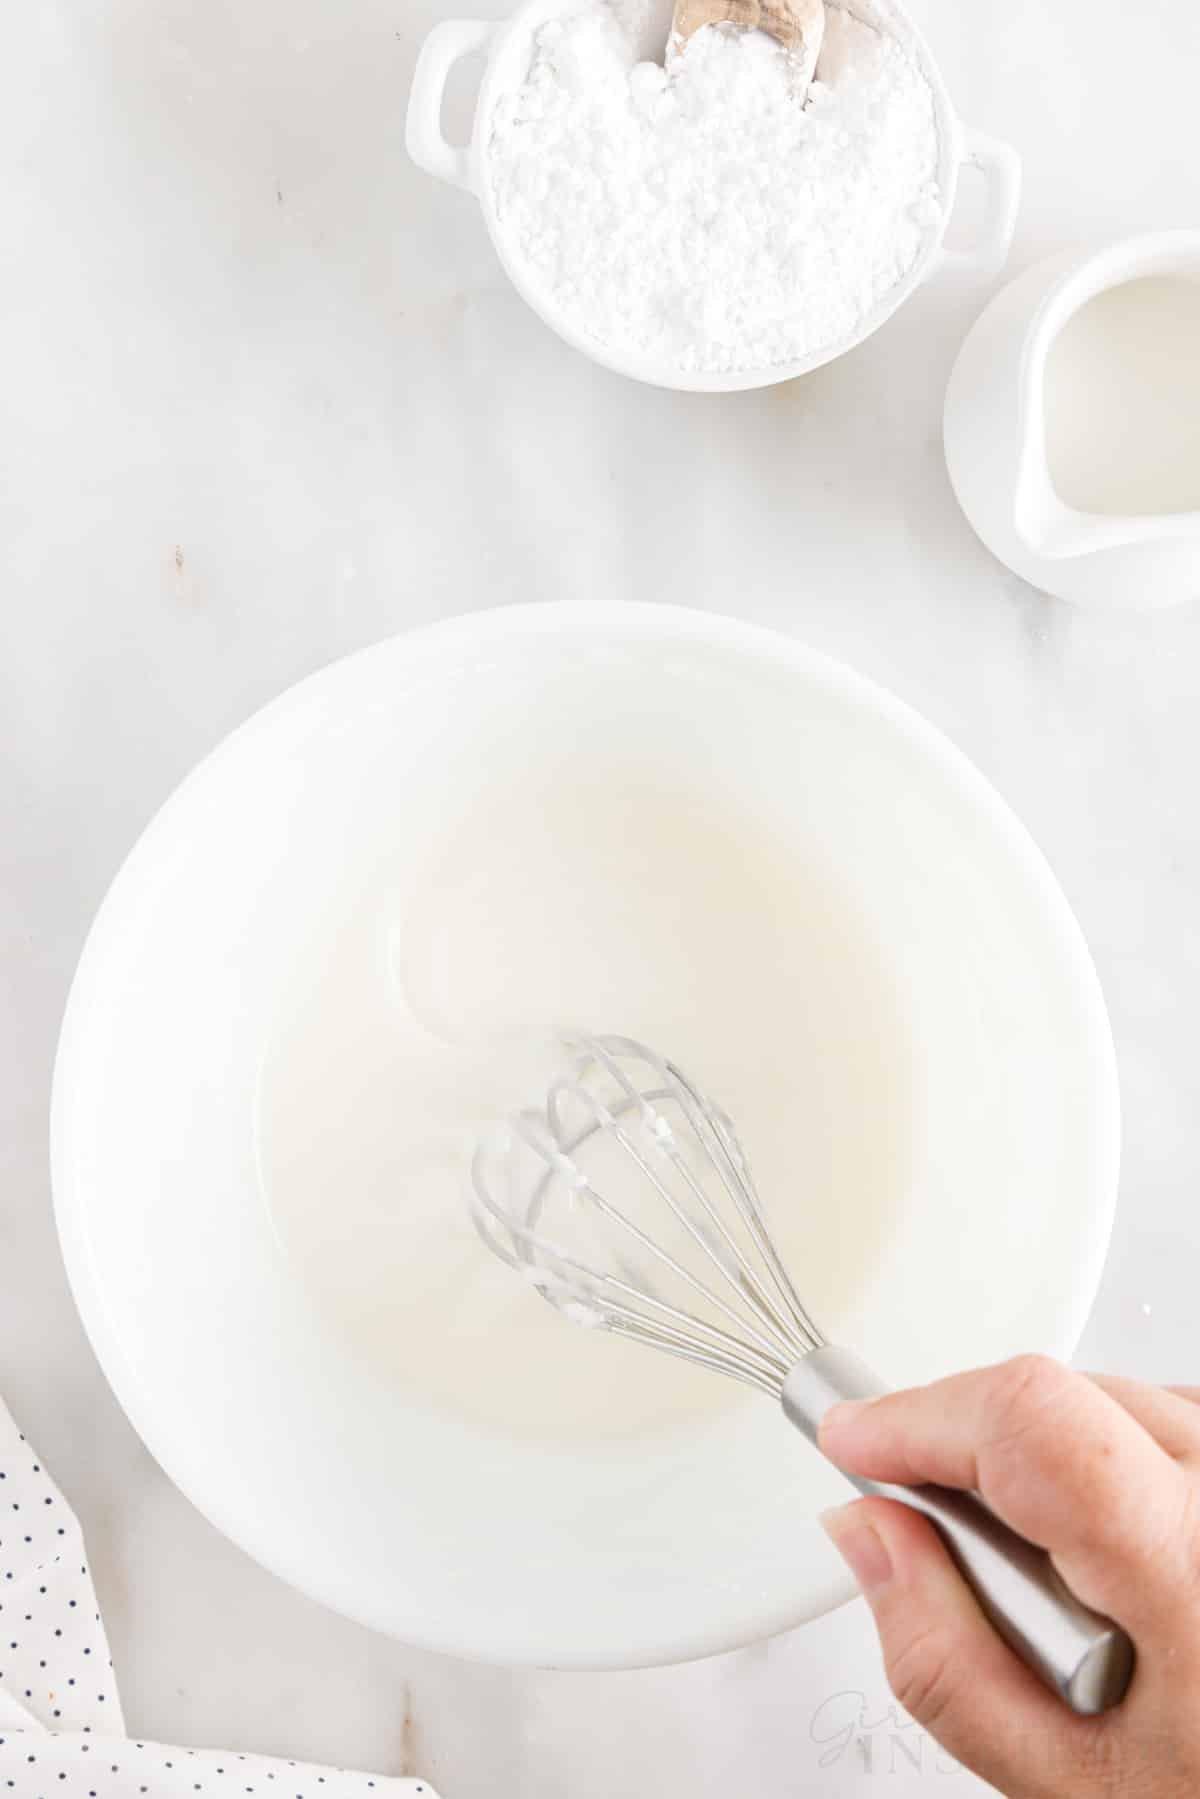 Duncan Hines Lemon Cake glaze in mixing bowl with whisk.